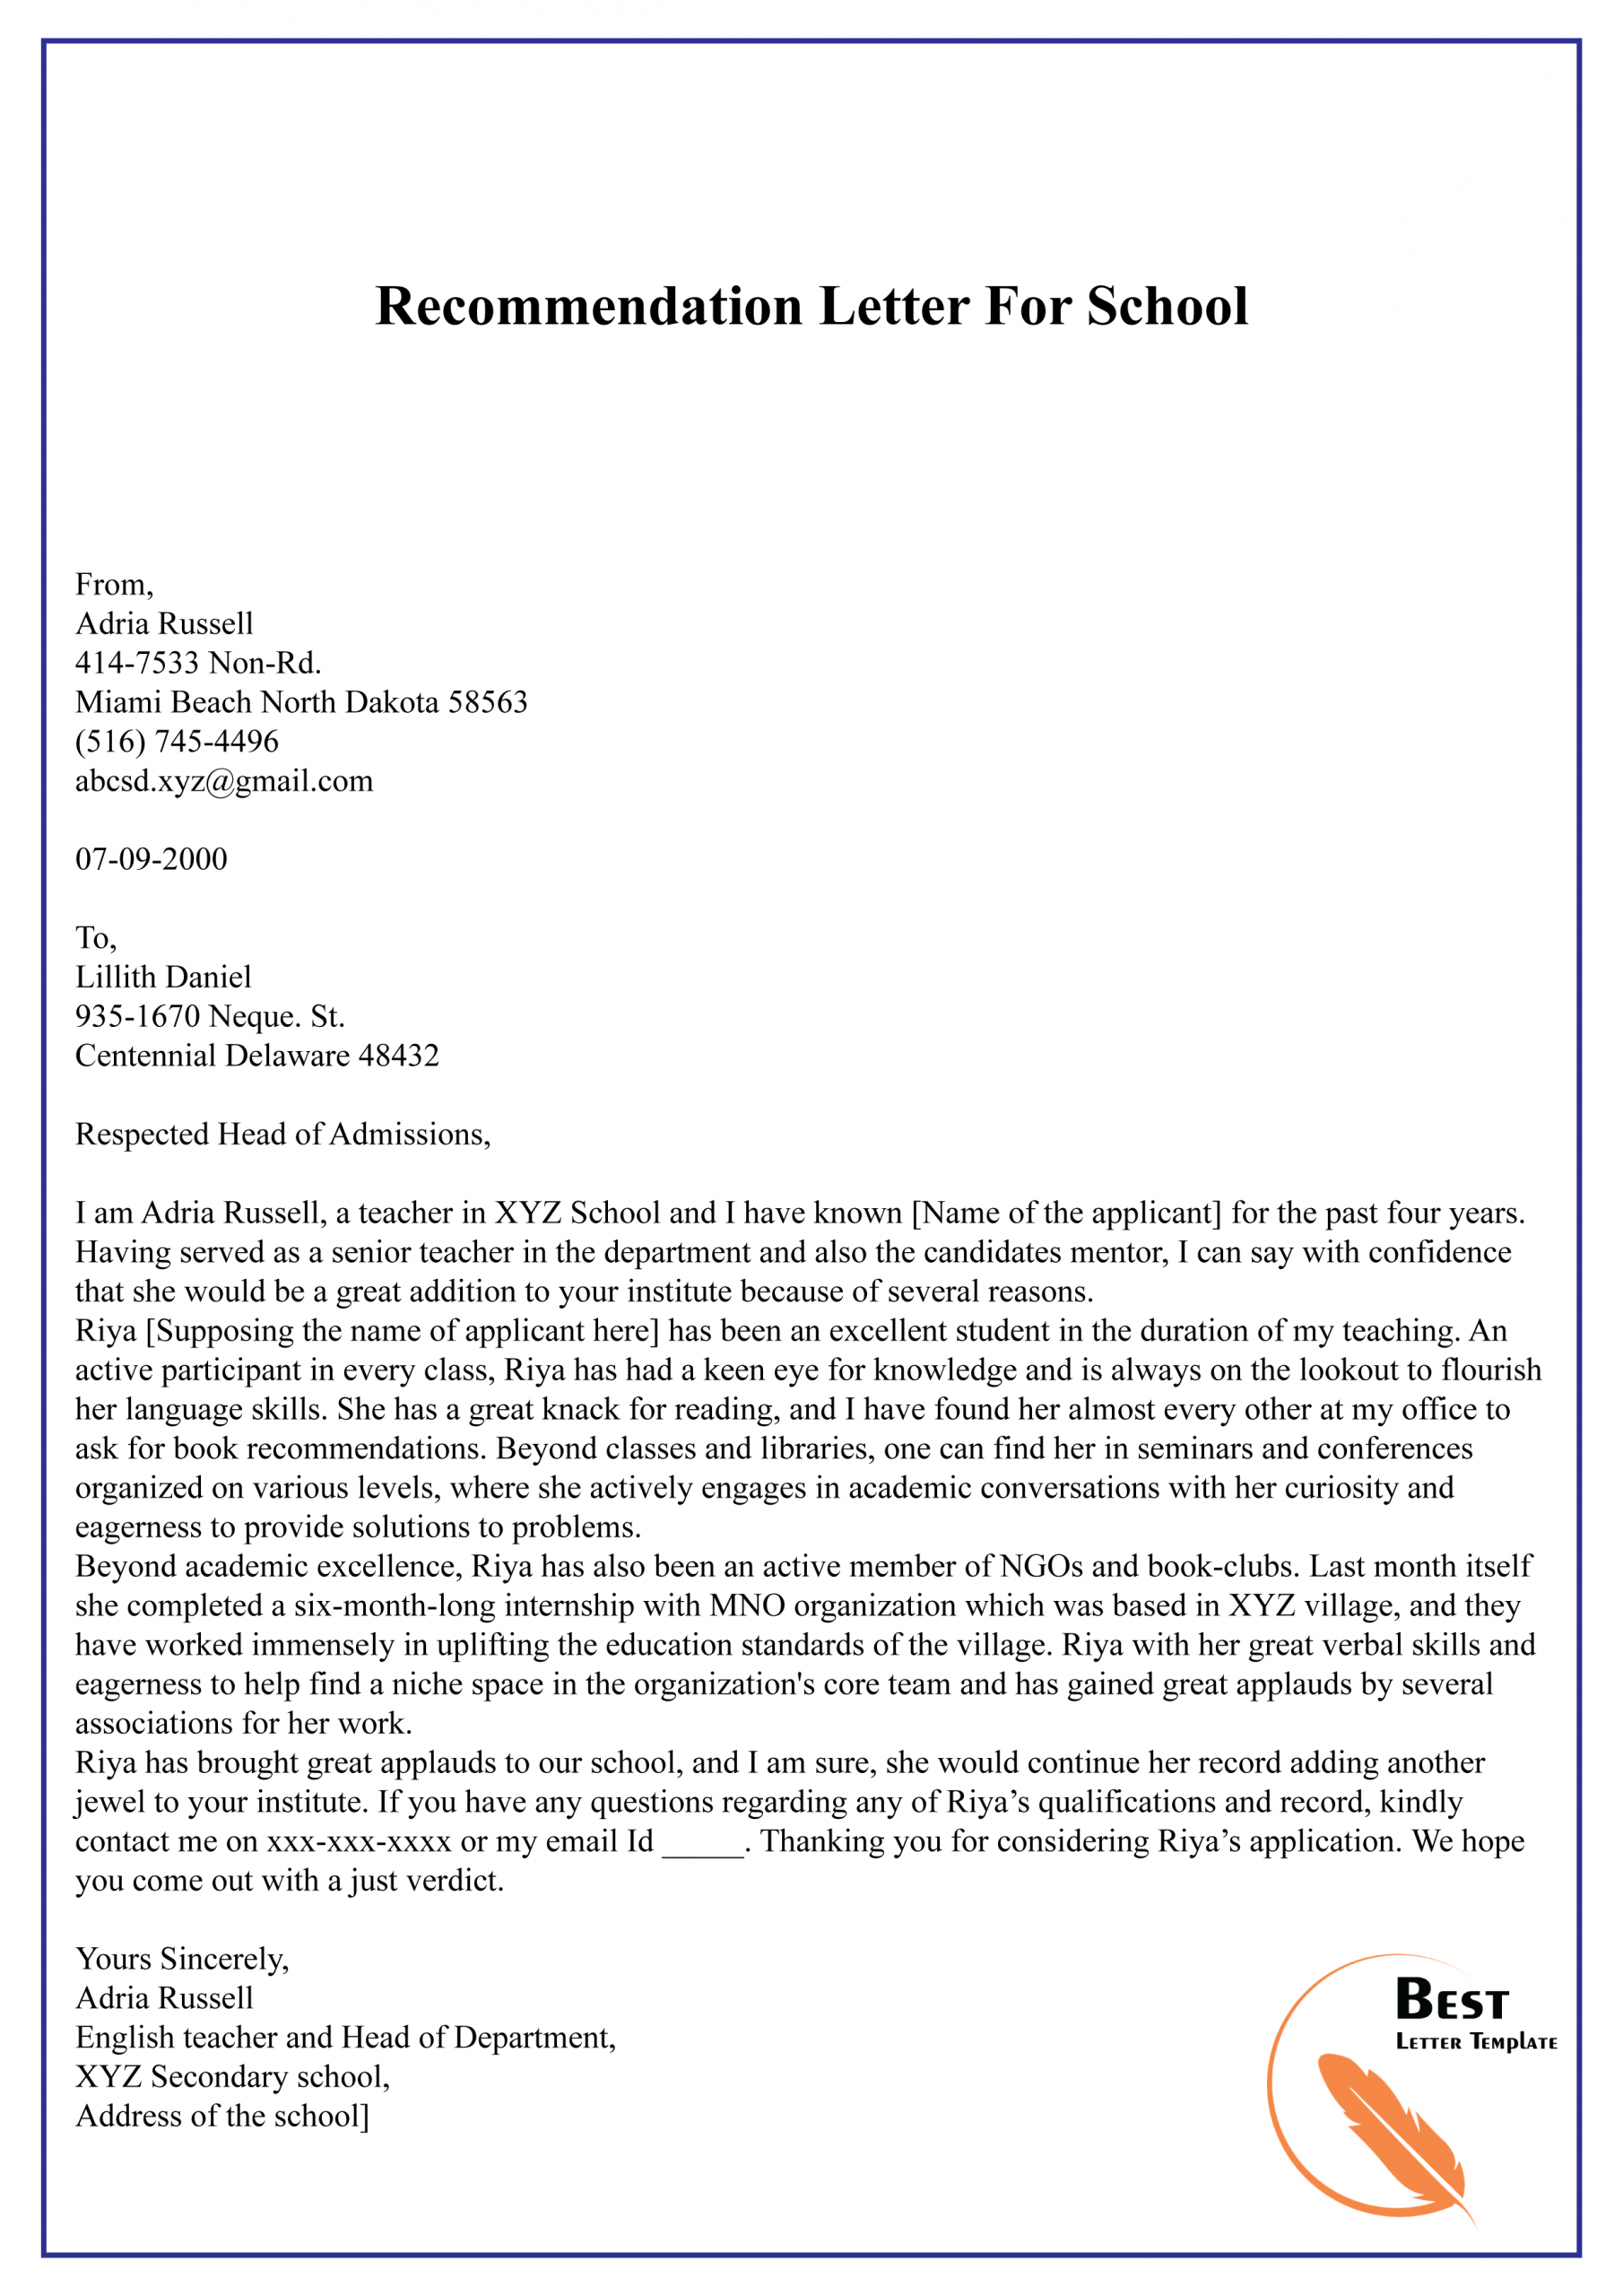 Recommendation Letter For School 01 Best Letter Template in measurements 2480 X 3508